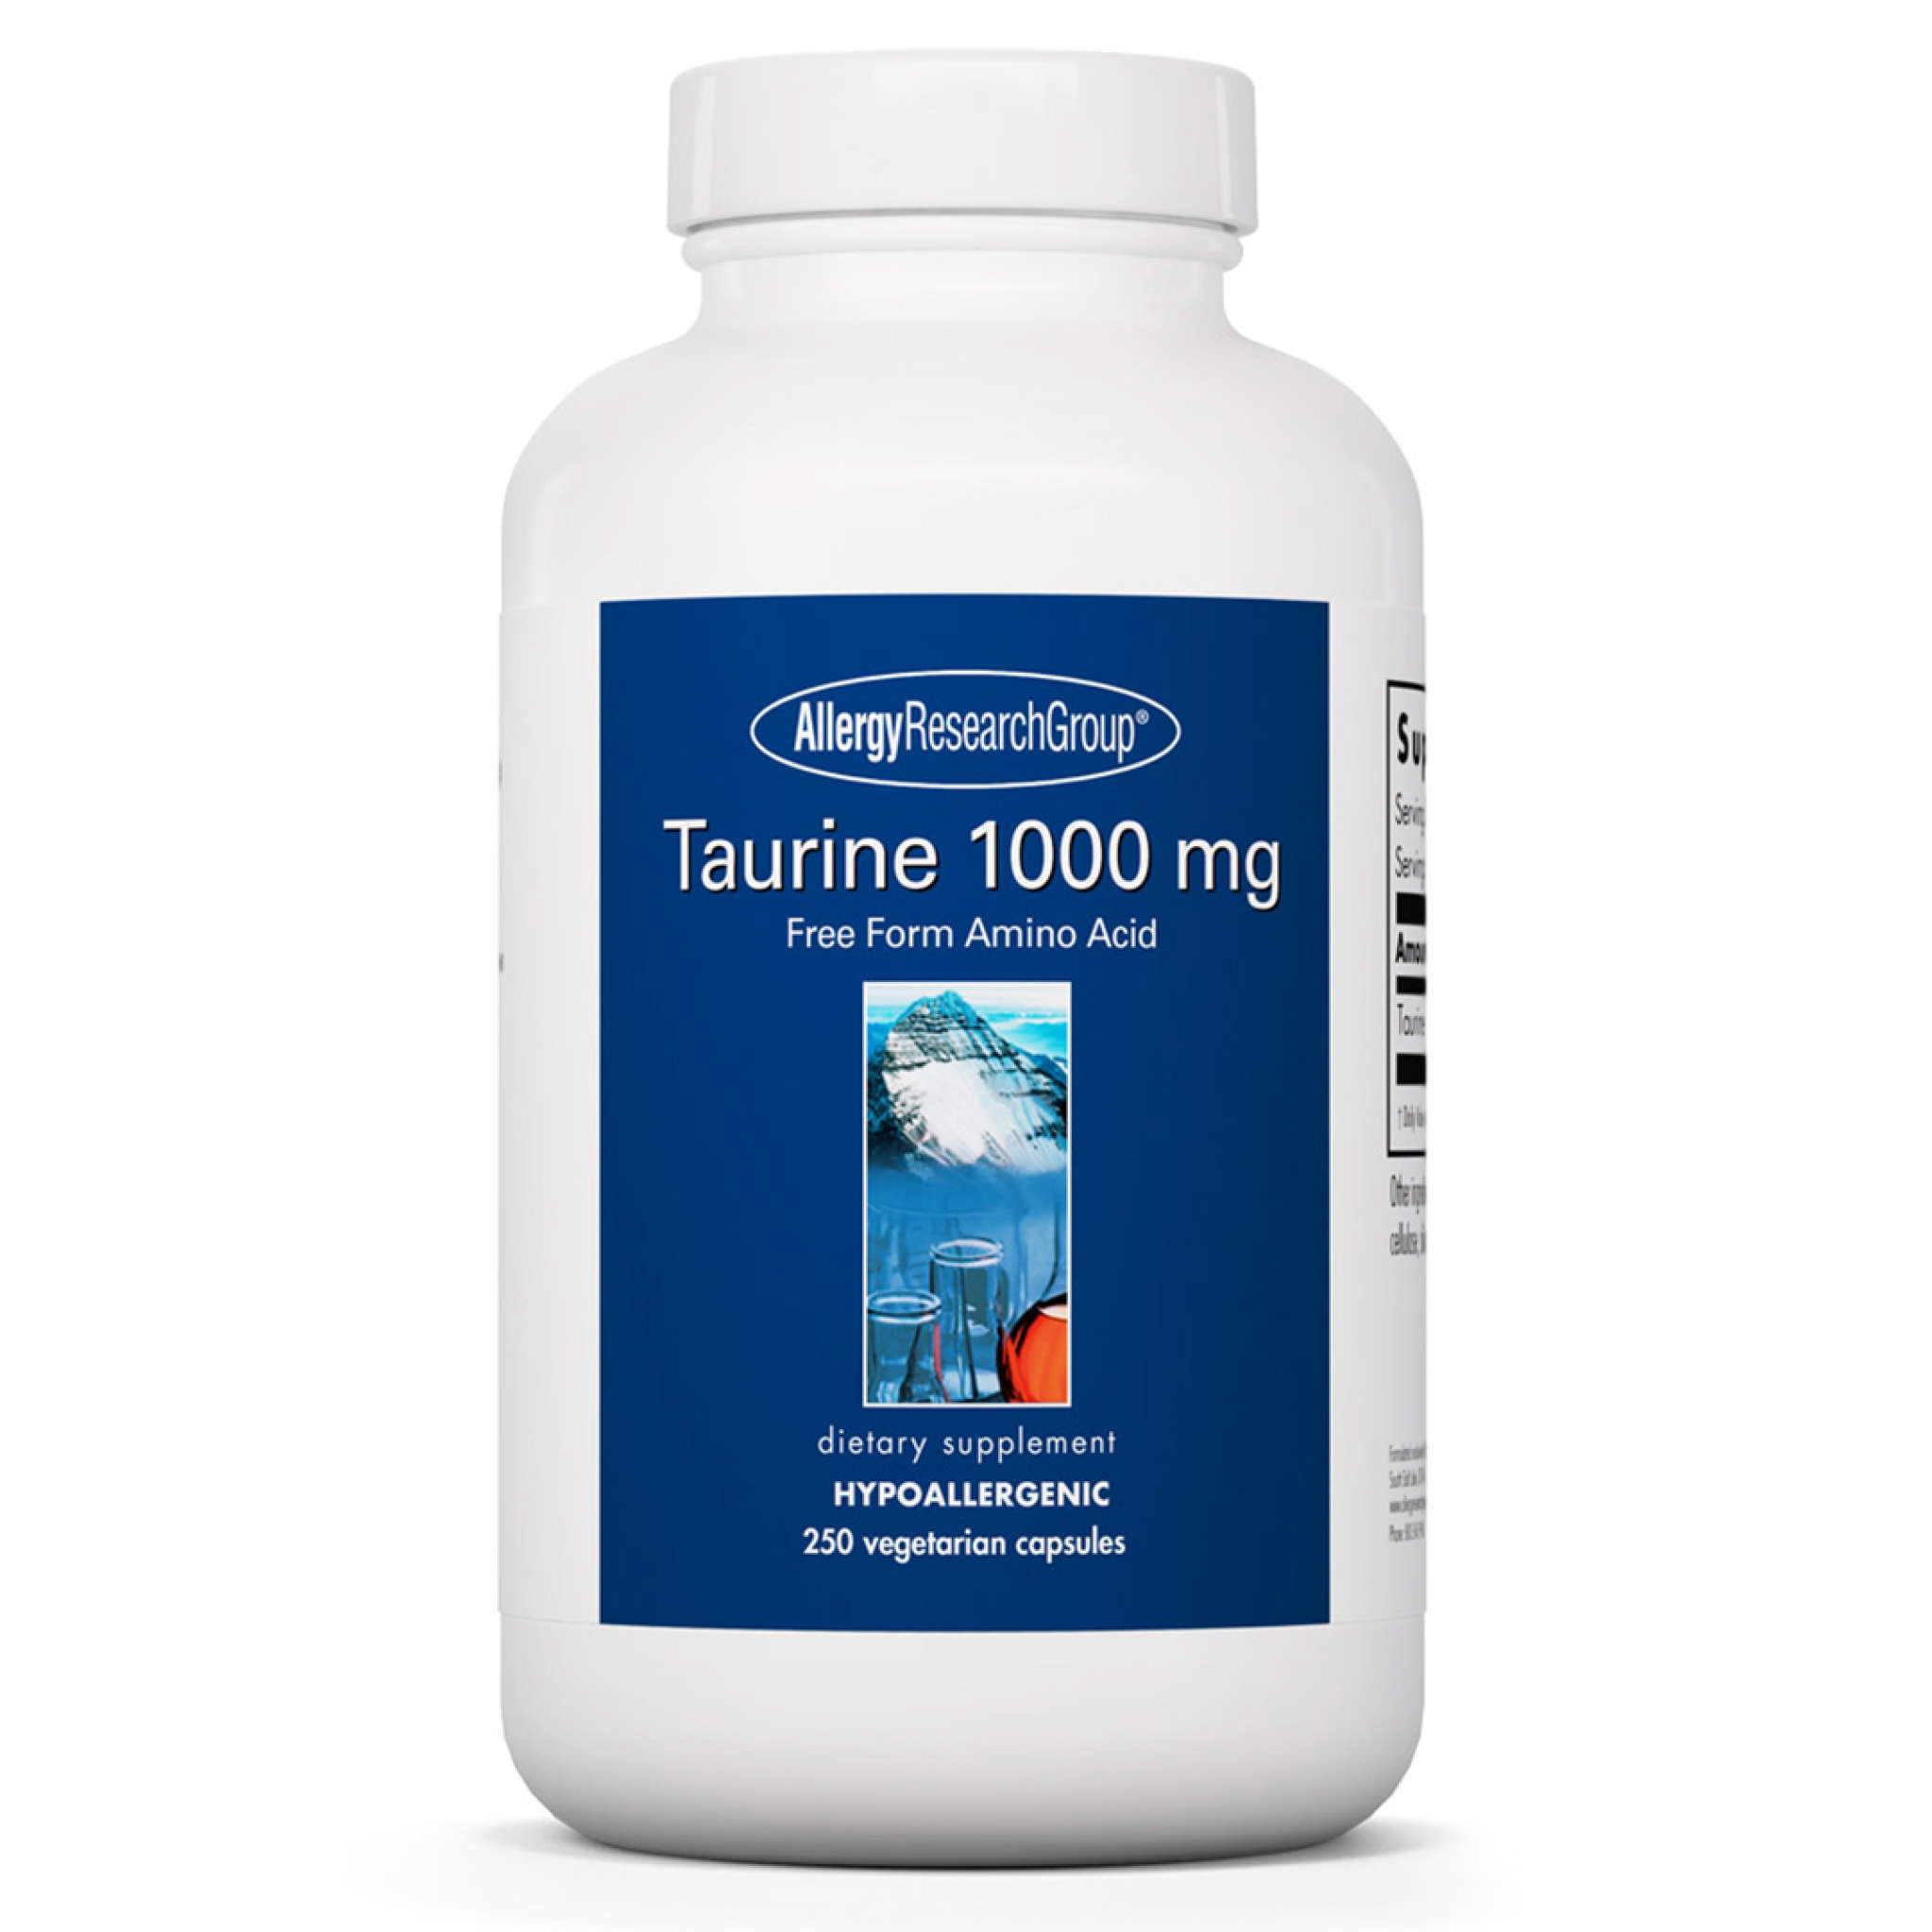 Allergy Research Group - Taurine 1000 mg